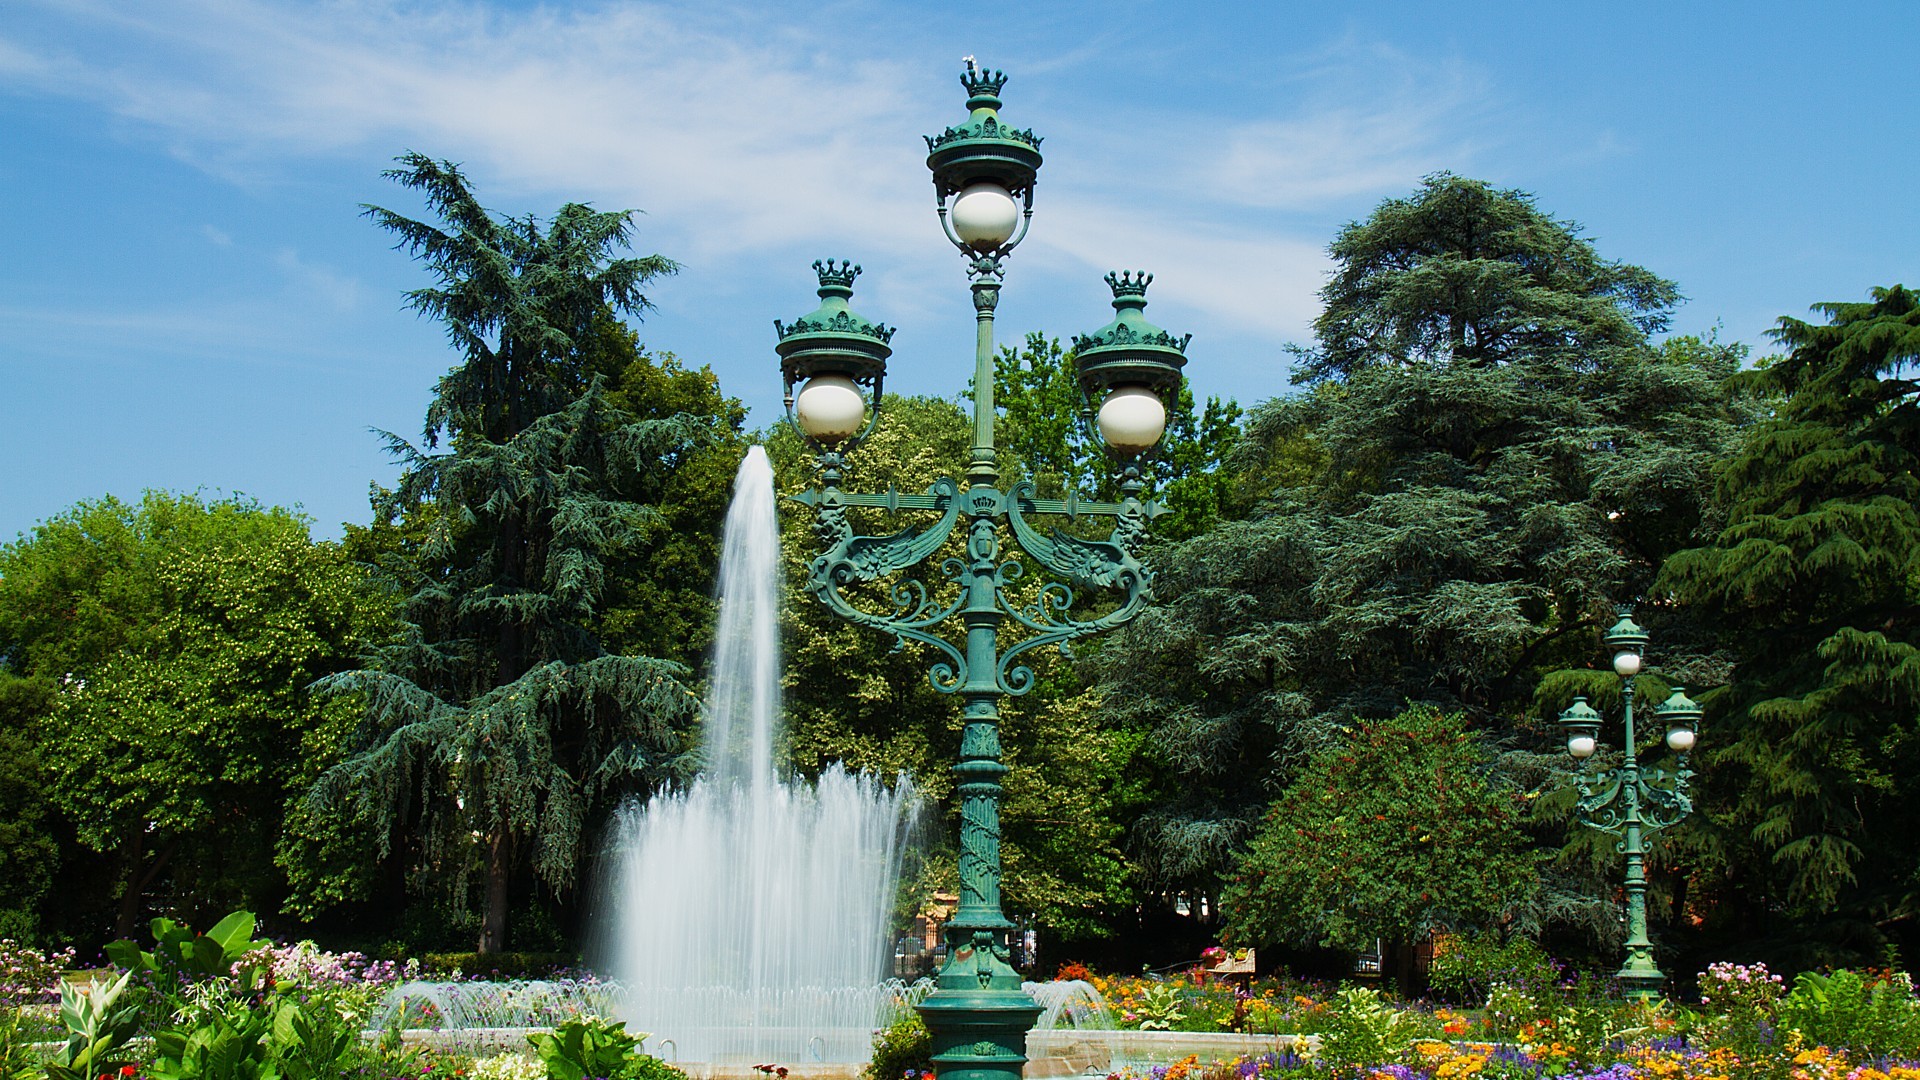 General 1920x1080 park fountain trees street light flowers outdoors